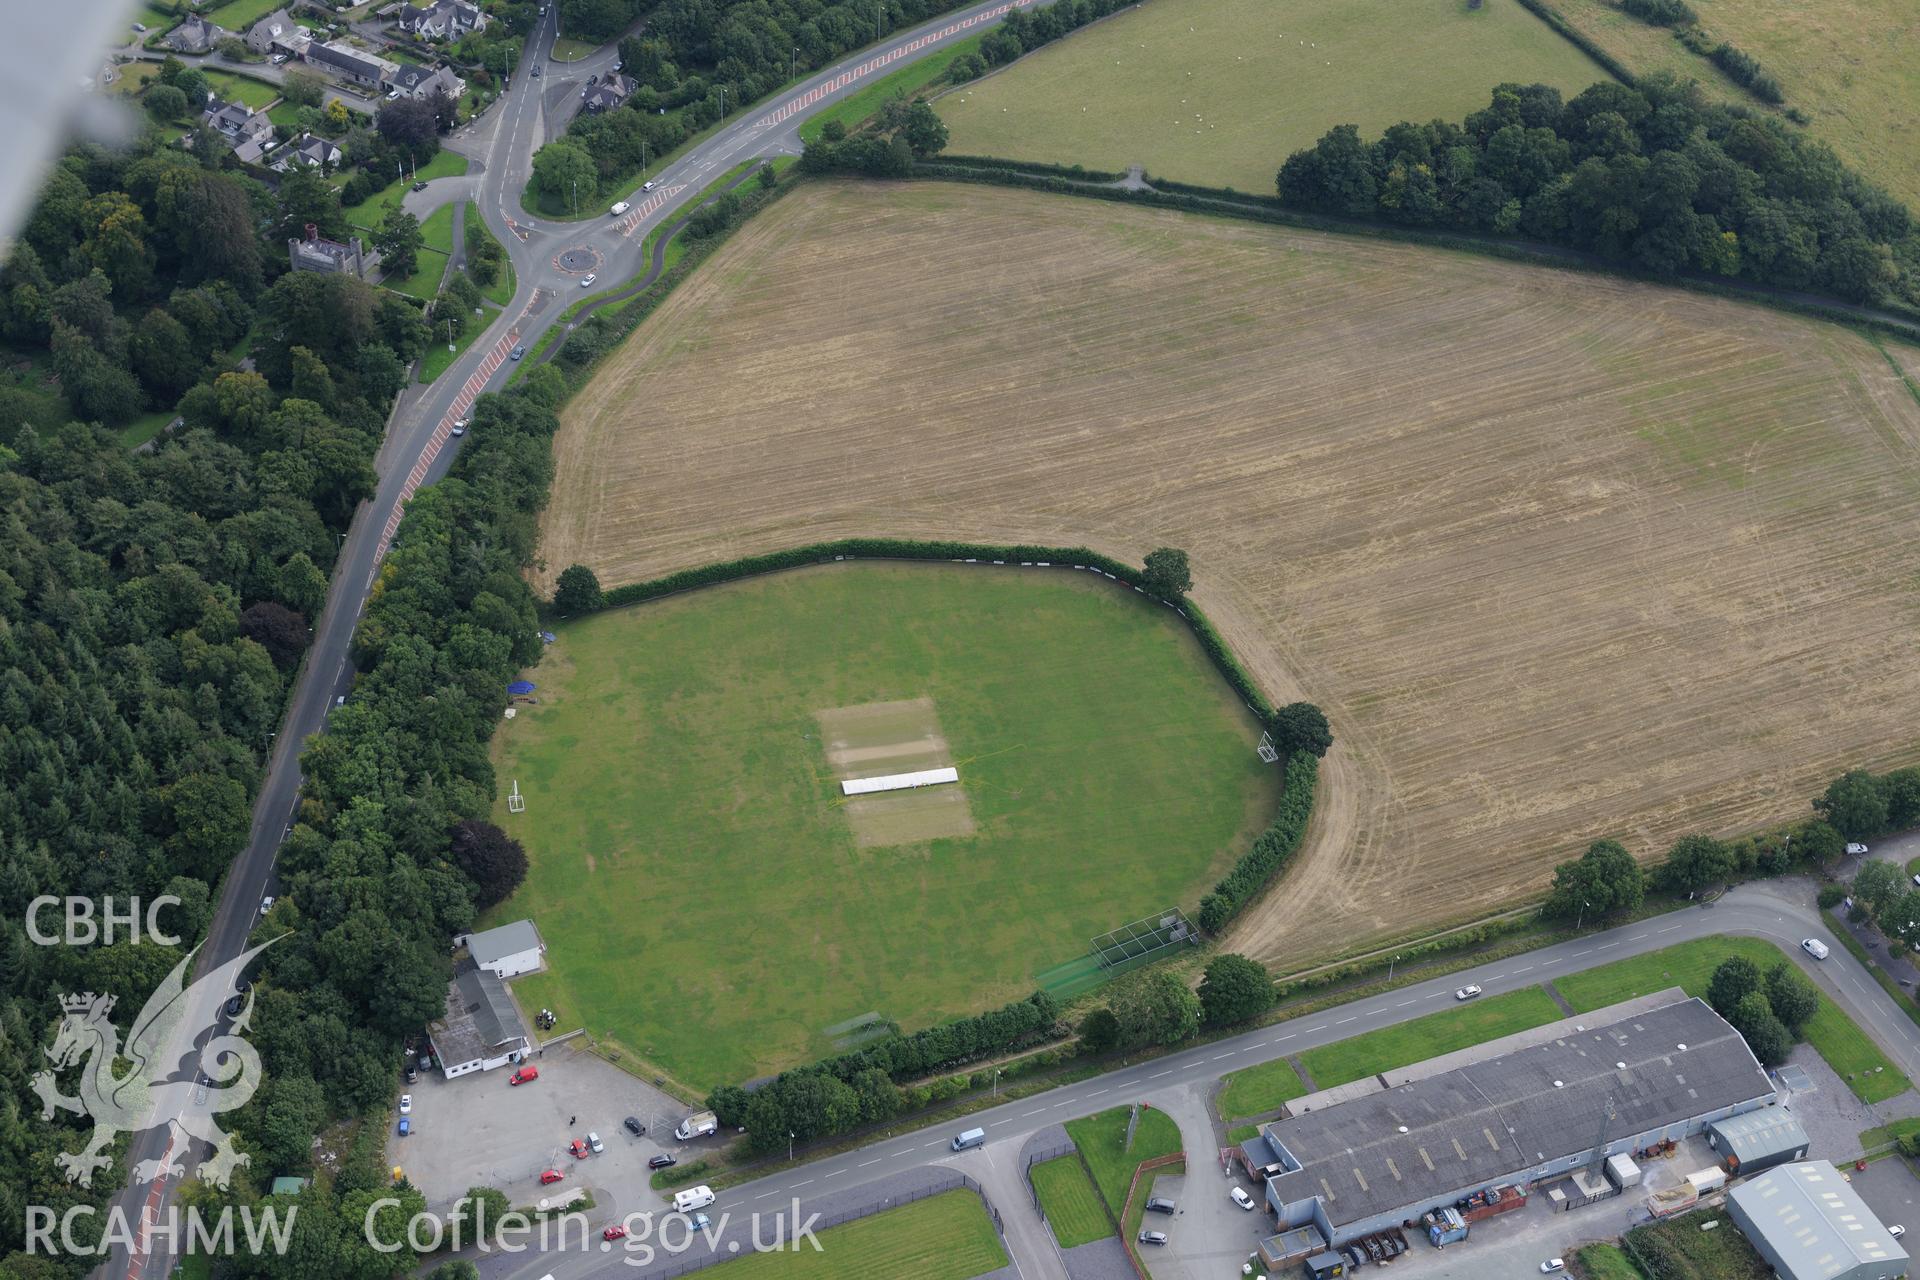 Llandegai henge monuments and cursus, Llandygai. Oblique aerial photograph taken during the Royal Commission's programme of archaeological aerial reconnaissance by Toby Driver on 11th September 2015.